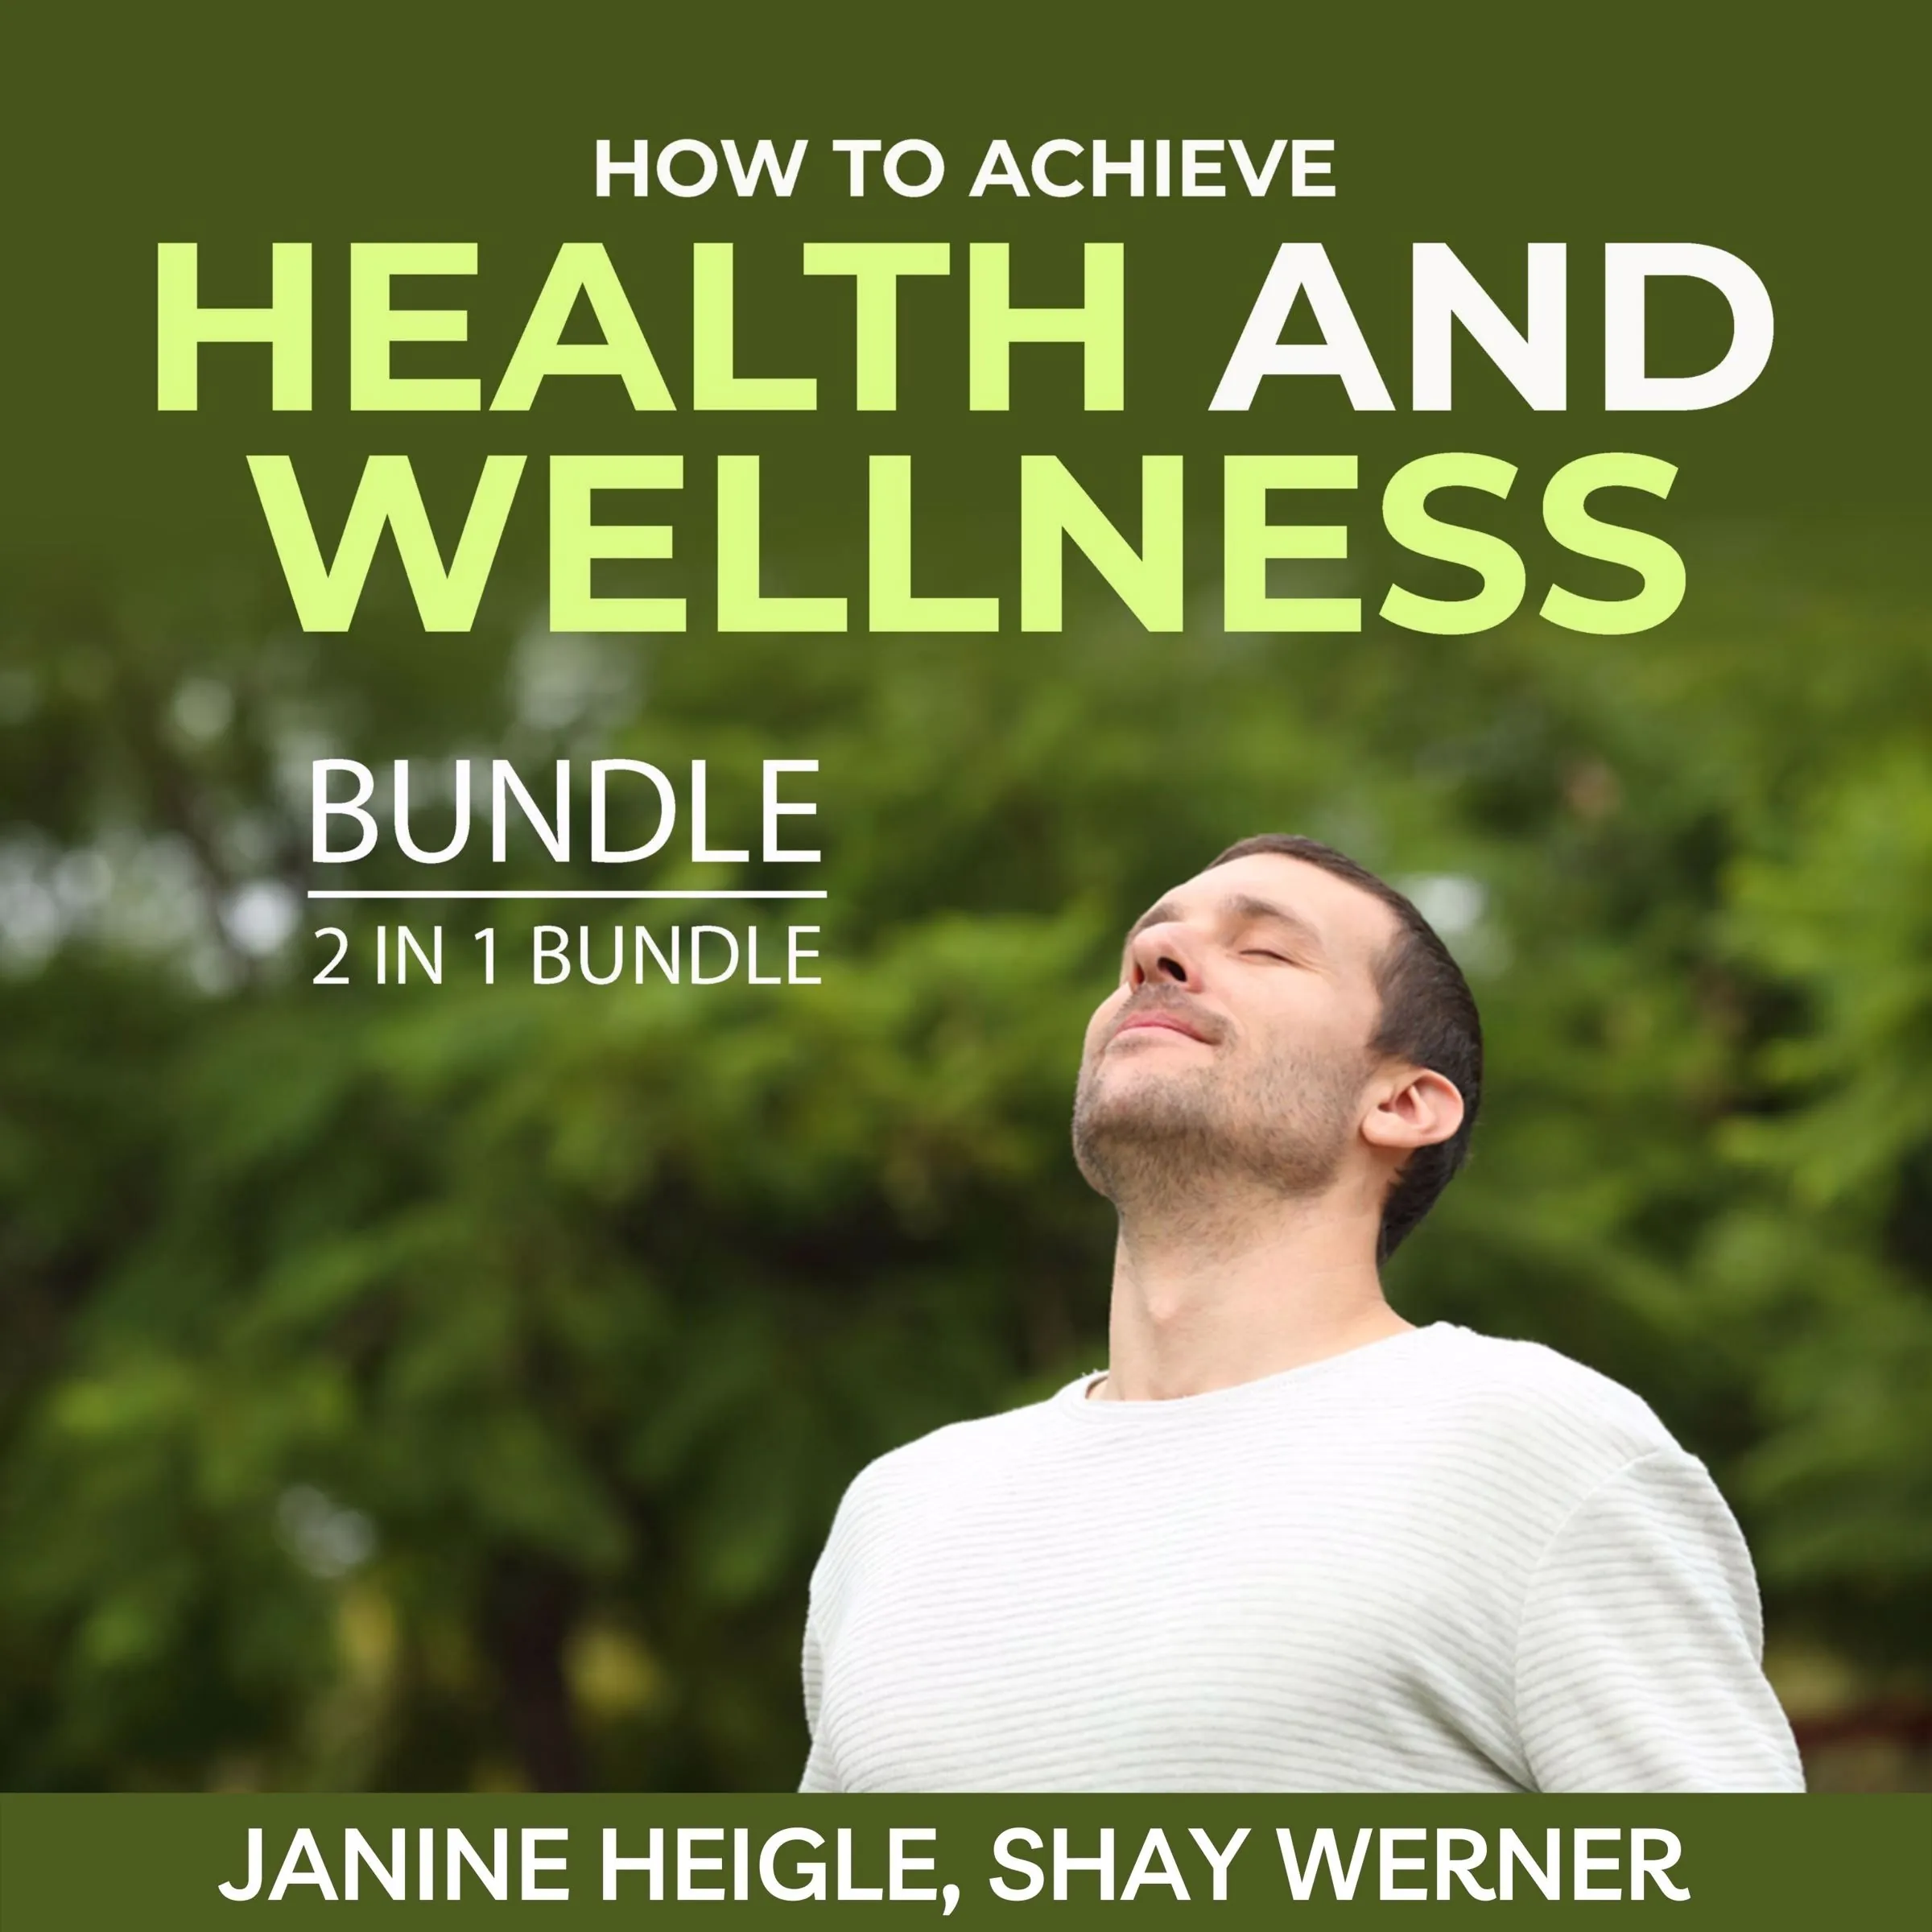 How to Achieve Health and Wellness Bundle, 2 in 1 Bundle Audiobook by Shay Werner